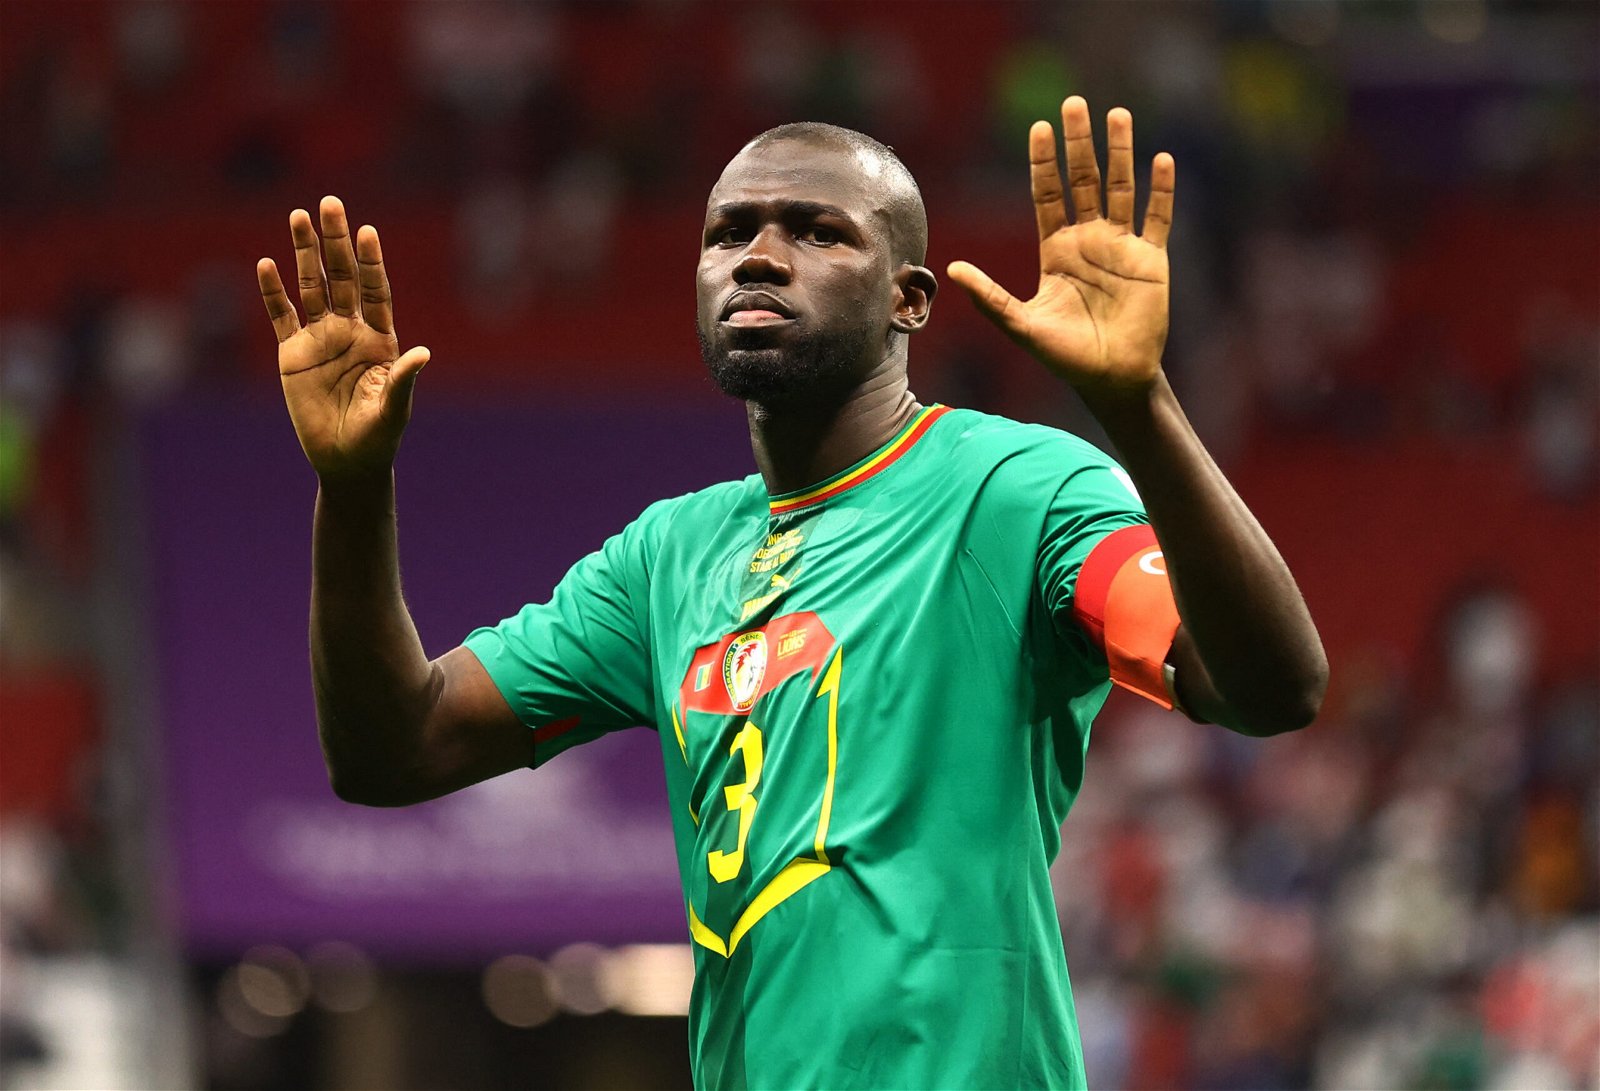 Kalidou Koulibaly is one of the highest paid footballers in the World